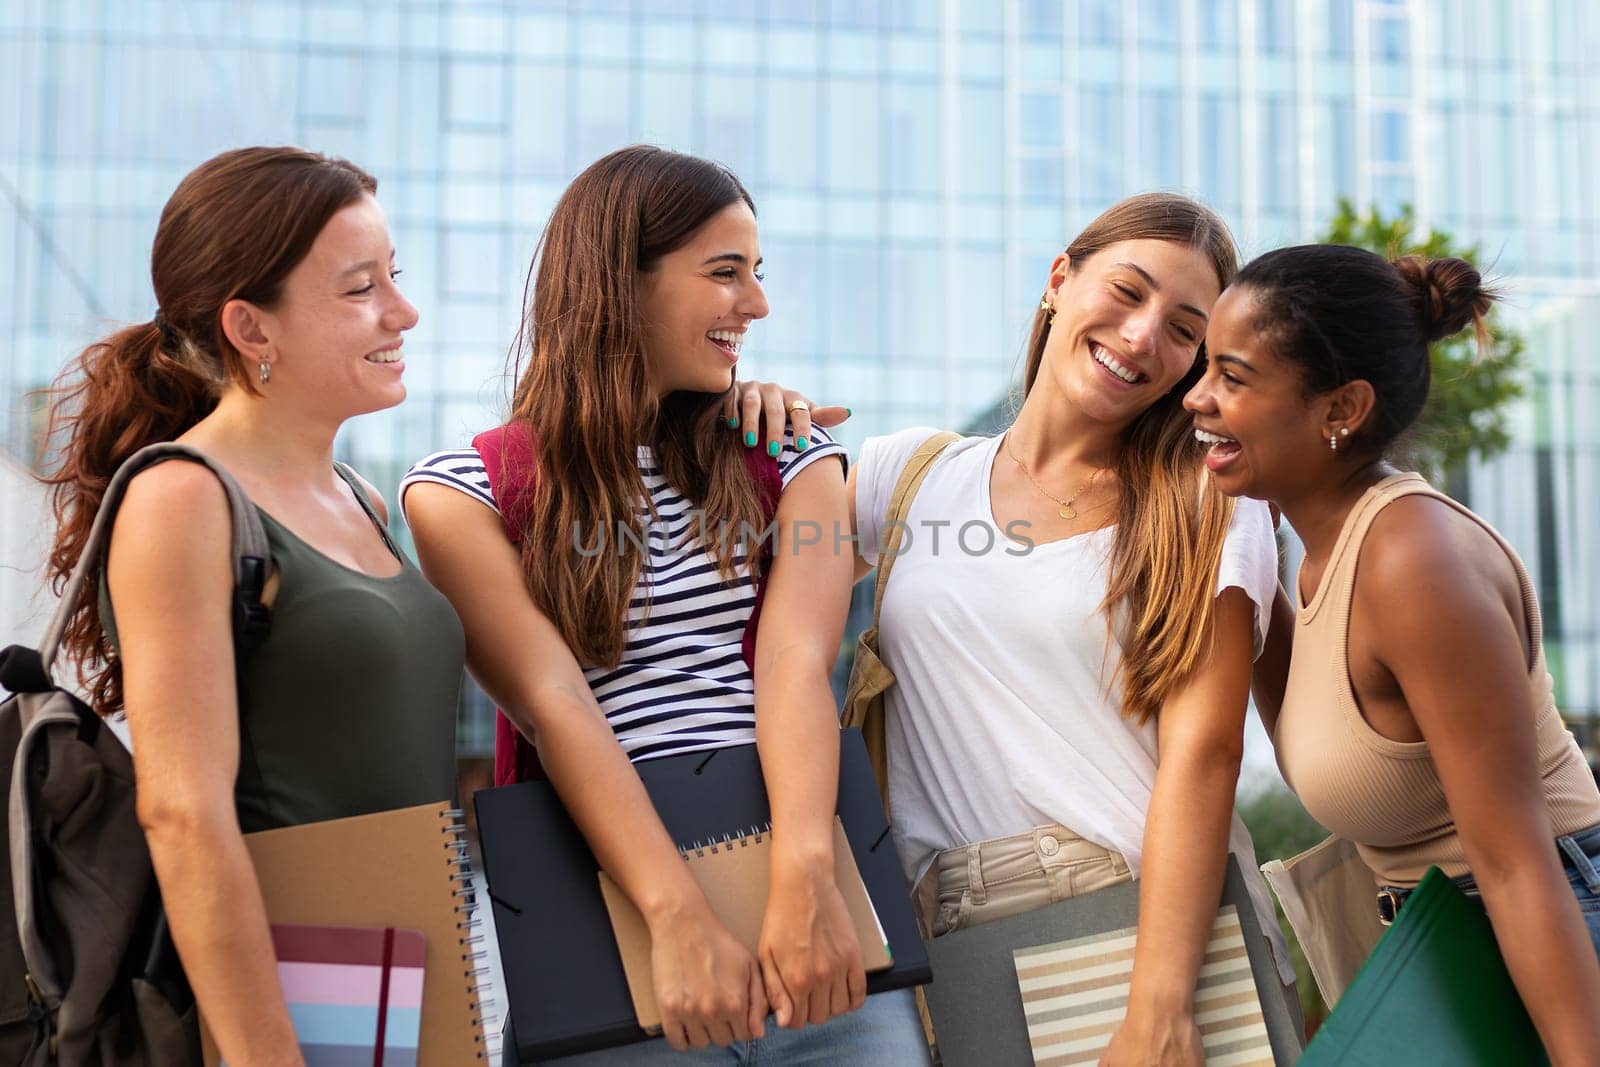 Group of happy multiethnic female college students friends standing outside in campus laughing and having fun. Education and friendship concept.